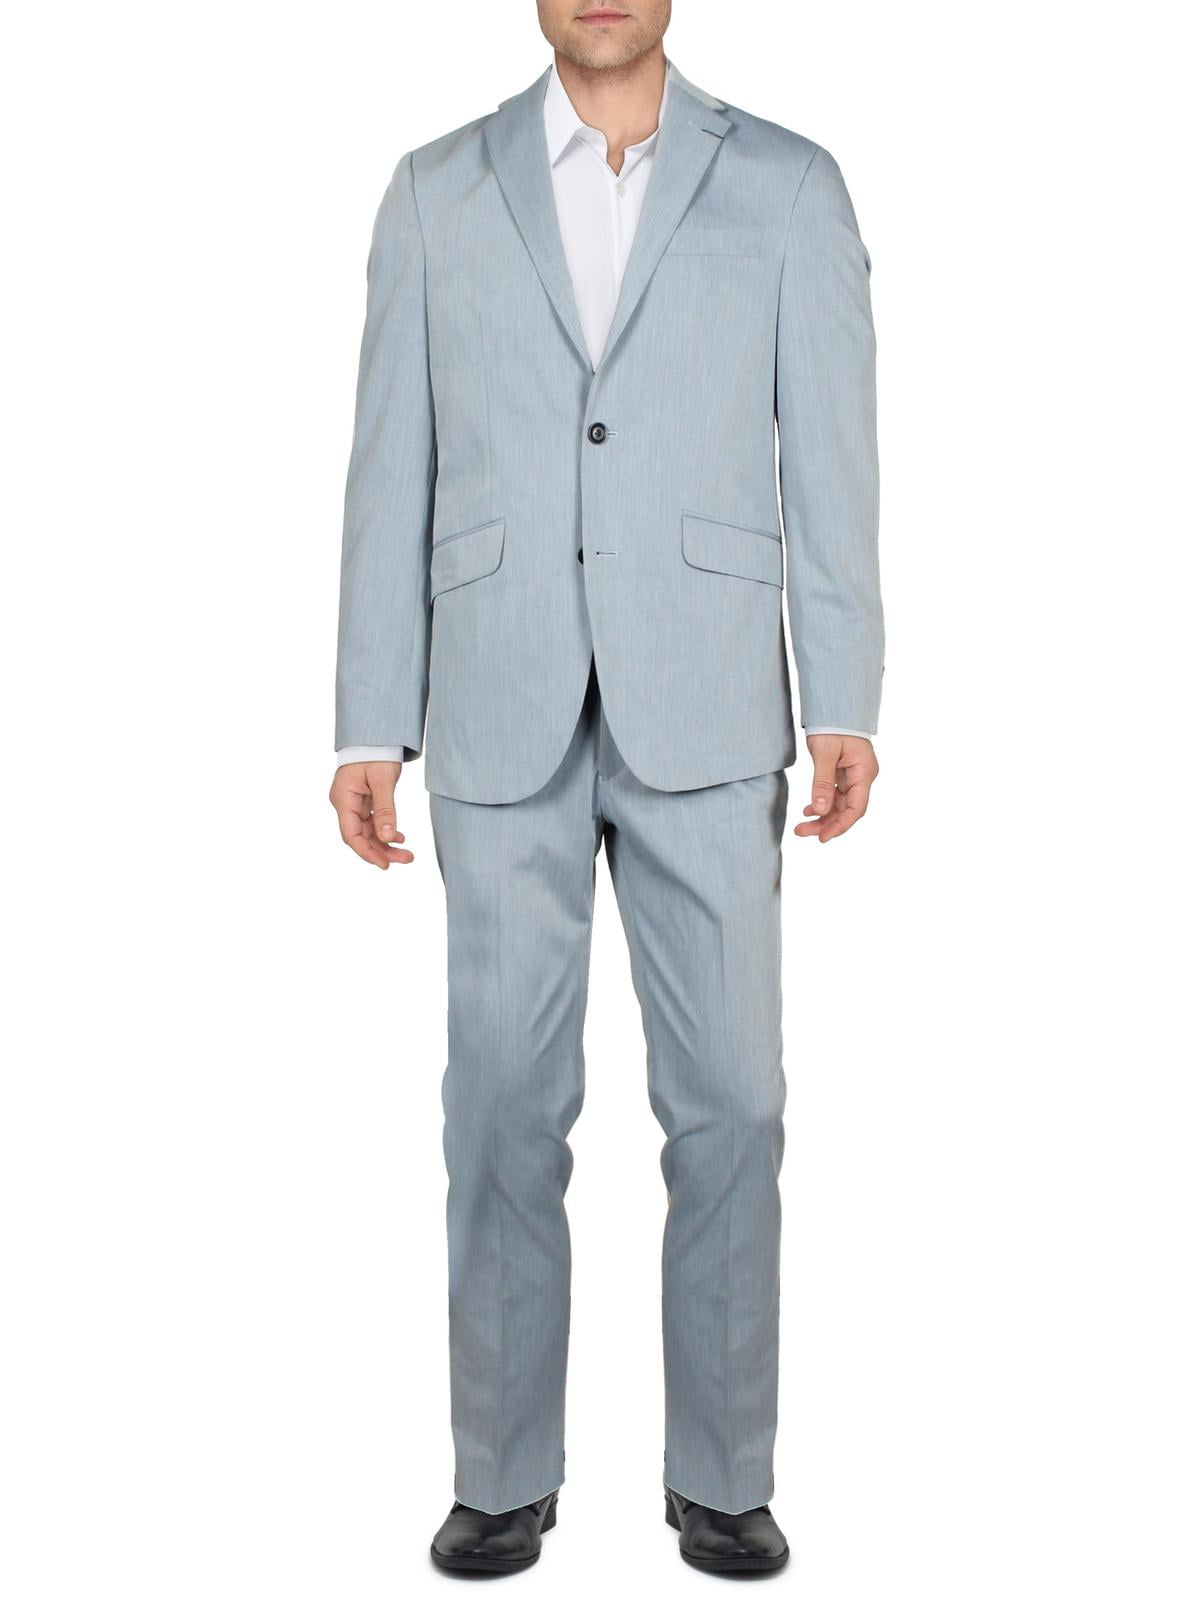 Kenneth Cole Reaction Mens Slim Fit Professional Two-Button Suit ...